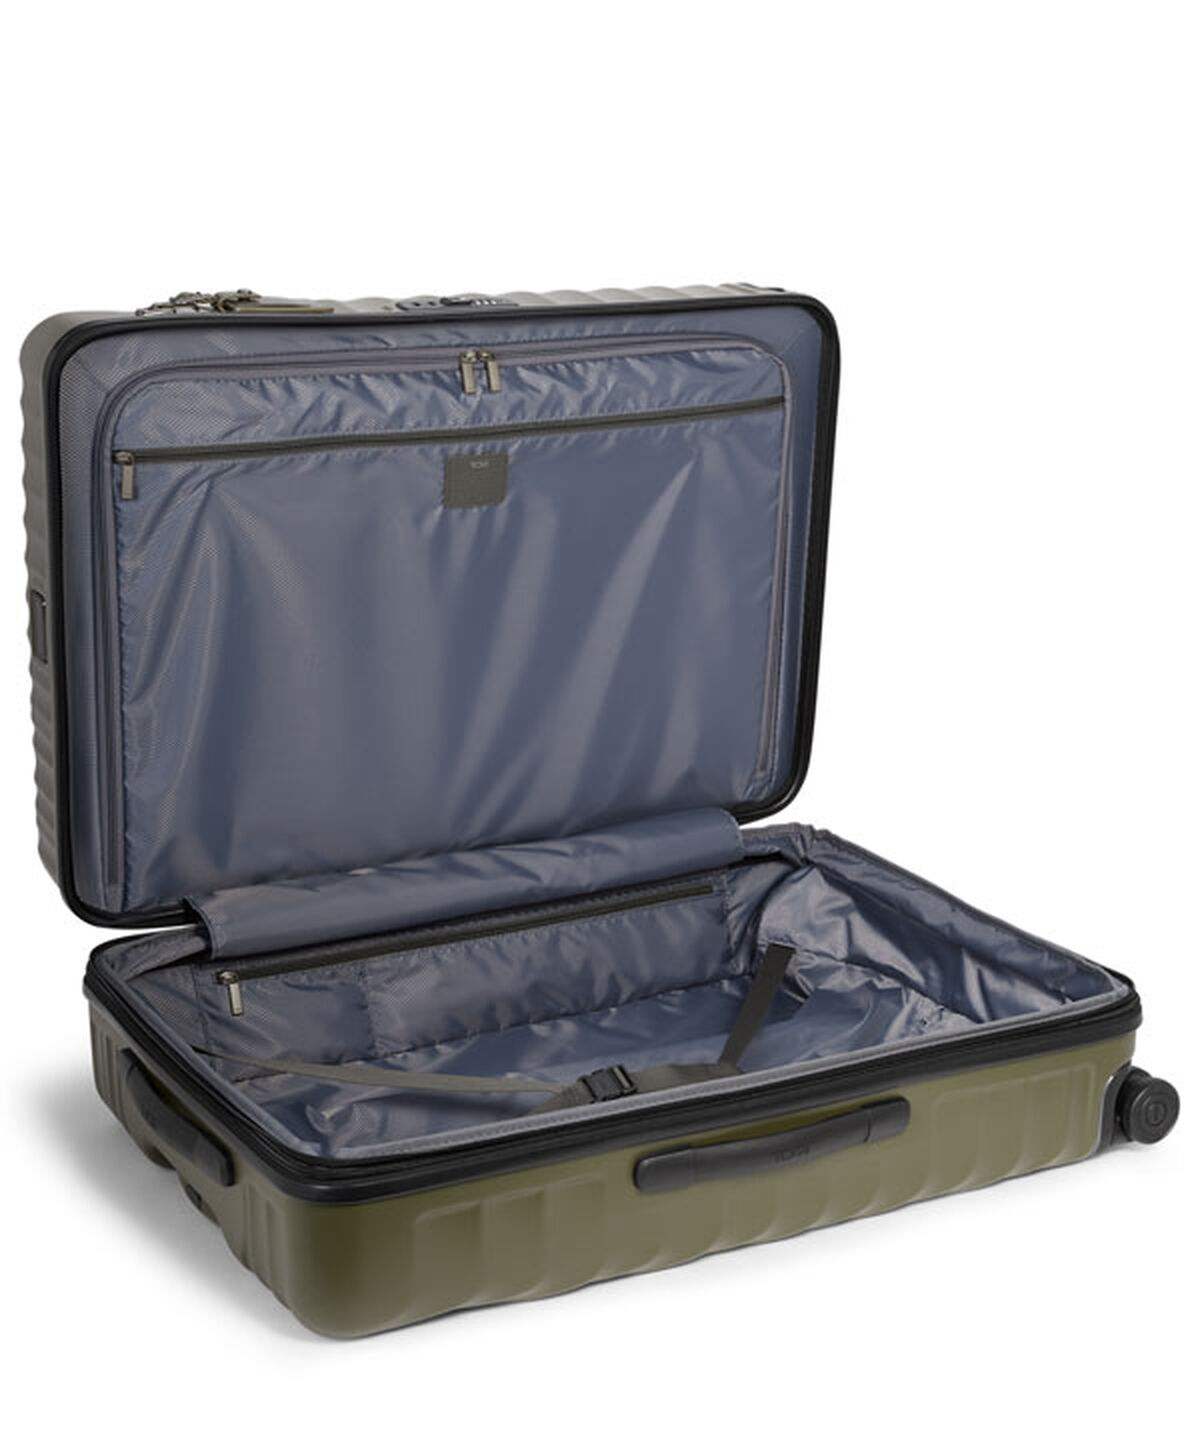 TUMI 19 Degree Extended Trip Expandable Checked Luggage Olive Texture